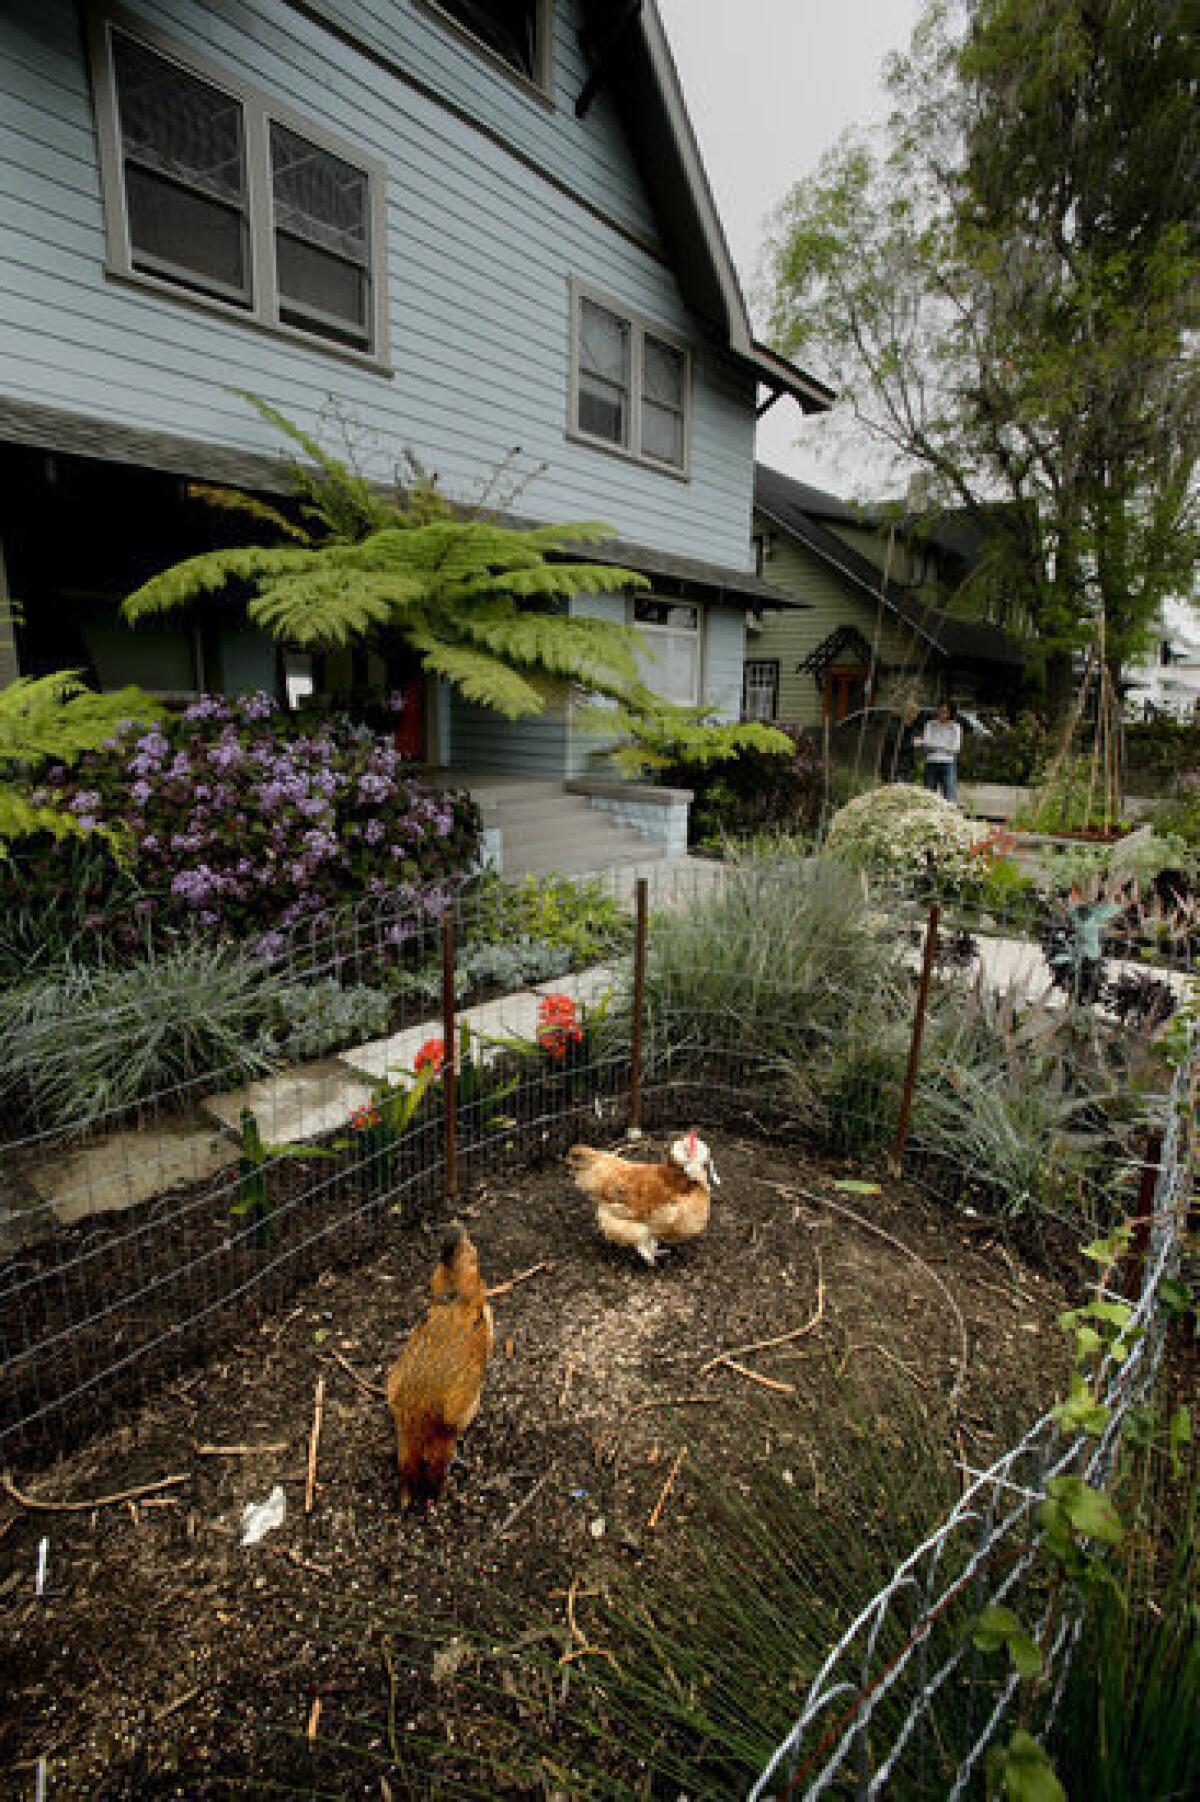 Julie Burleigh says the chickens in her West Adams garden are happier and producing more since she installed a chicken run connecting the front and backyard.